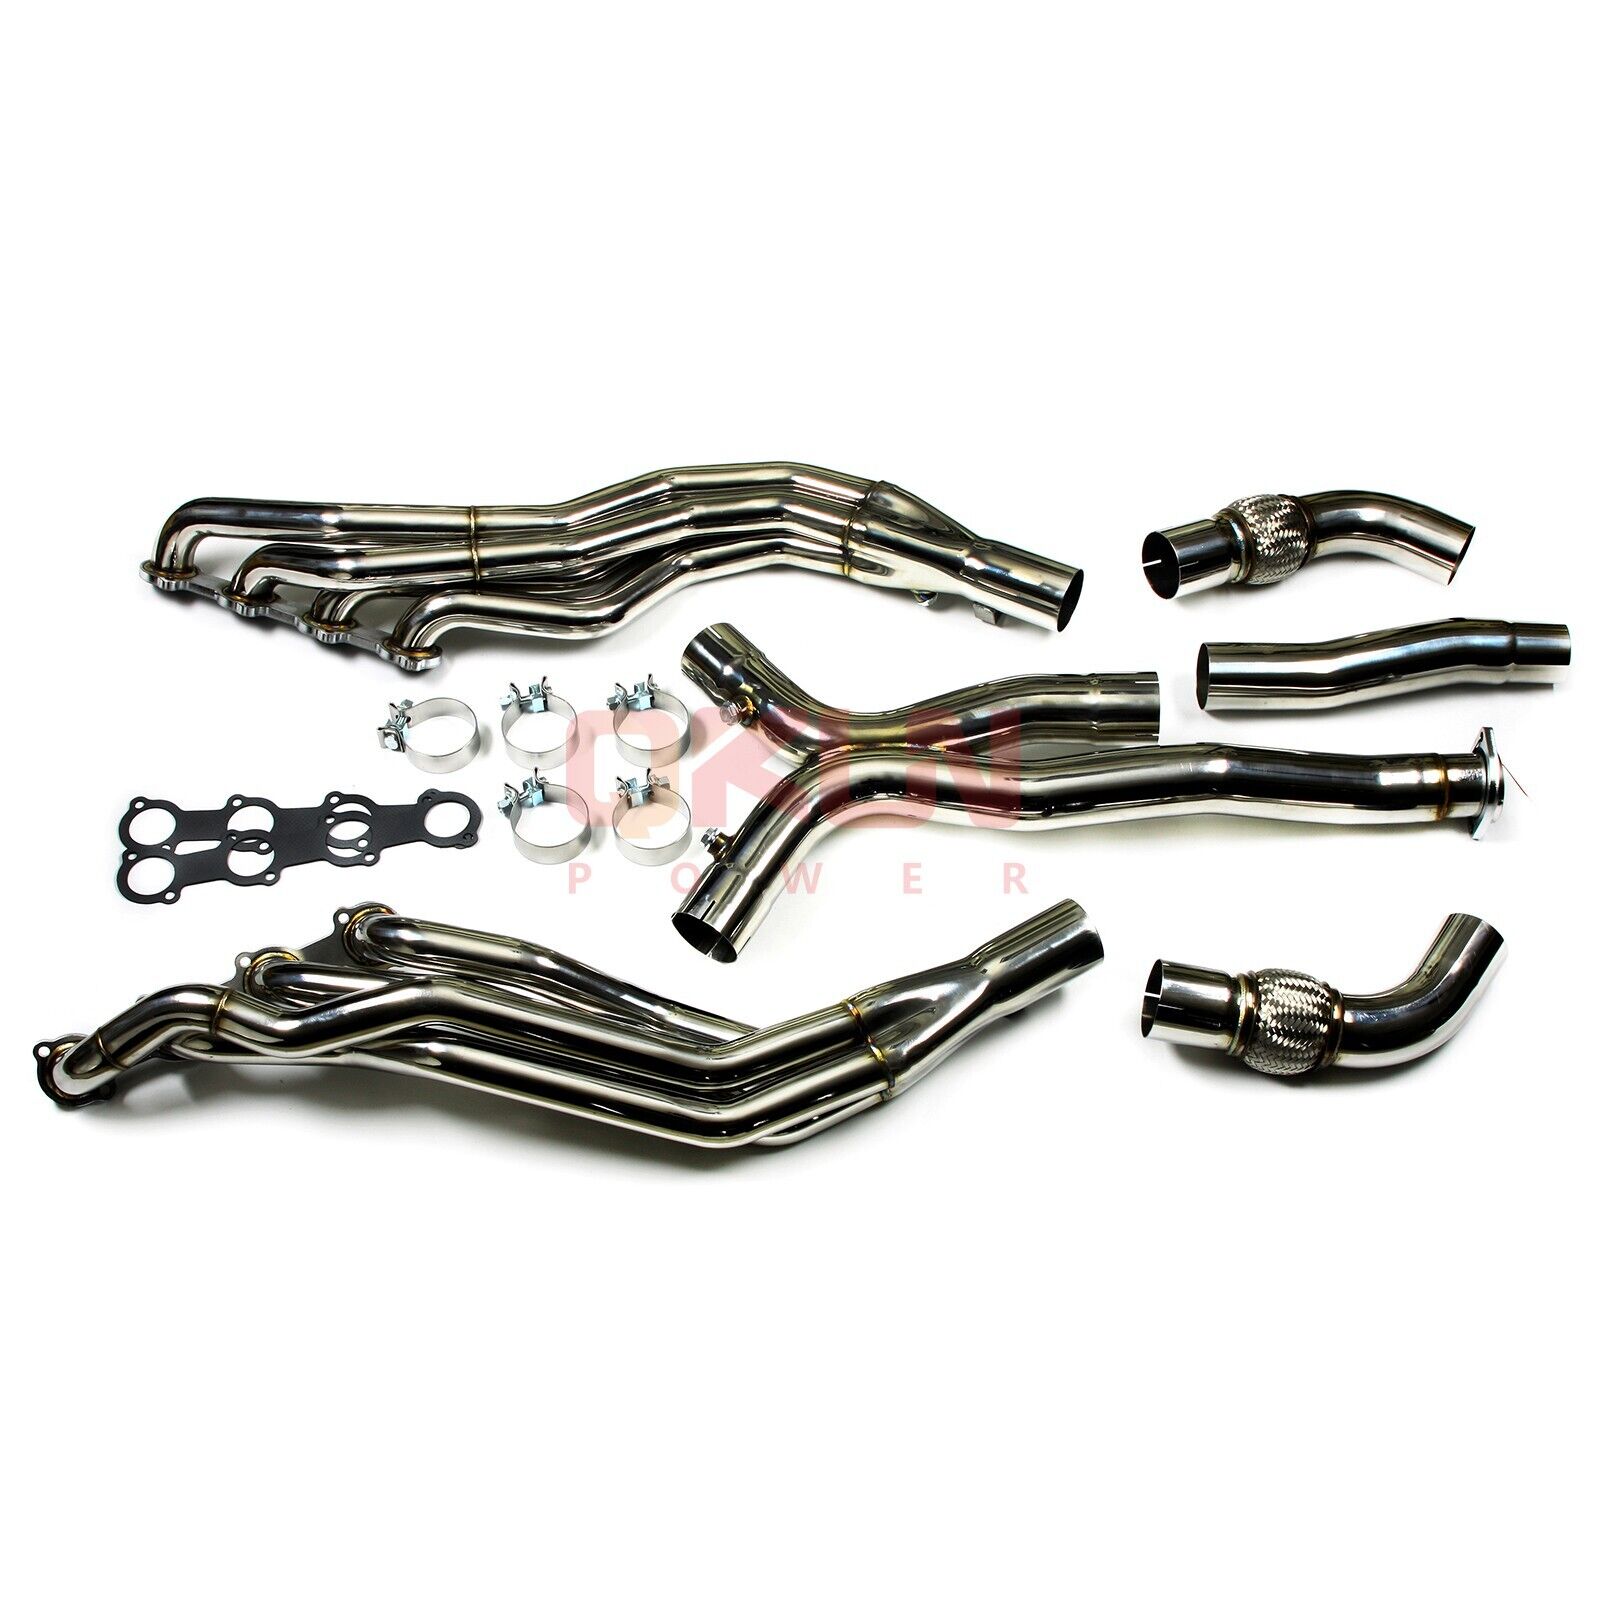 LONG HEADER REPLACEMENT FOR MERCEDES BENZ AMG CLS55 CLS500 E55 E500 M113K